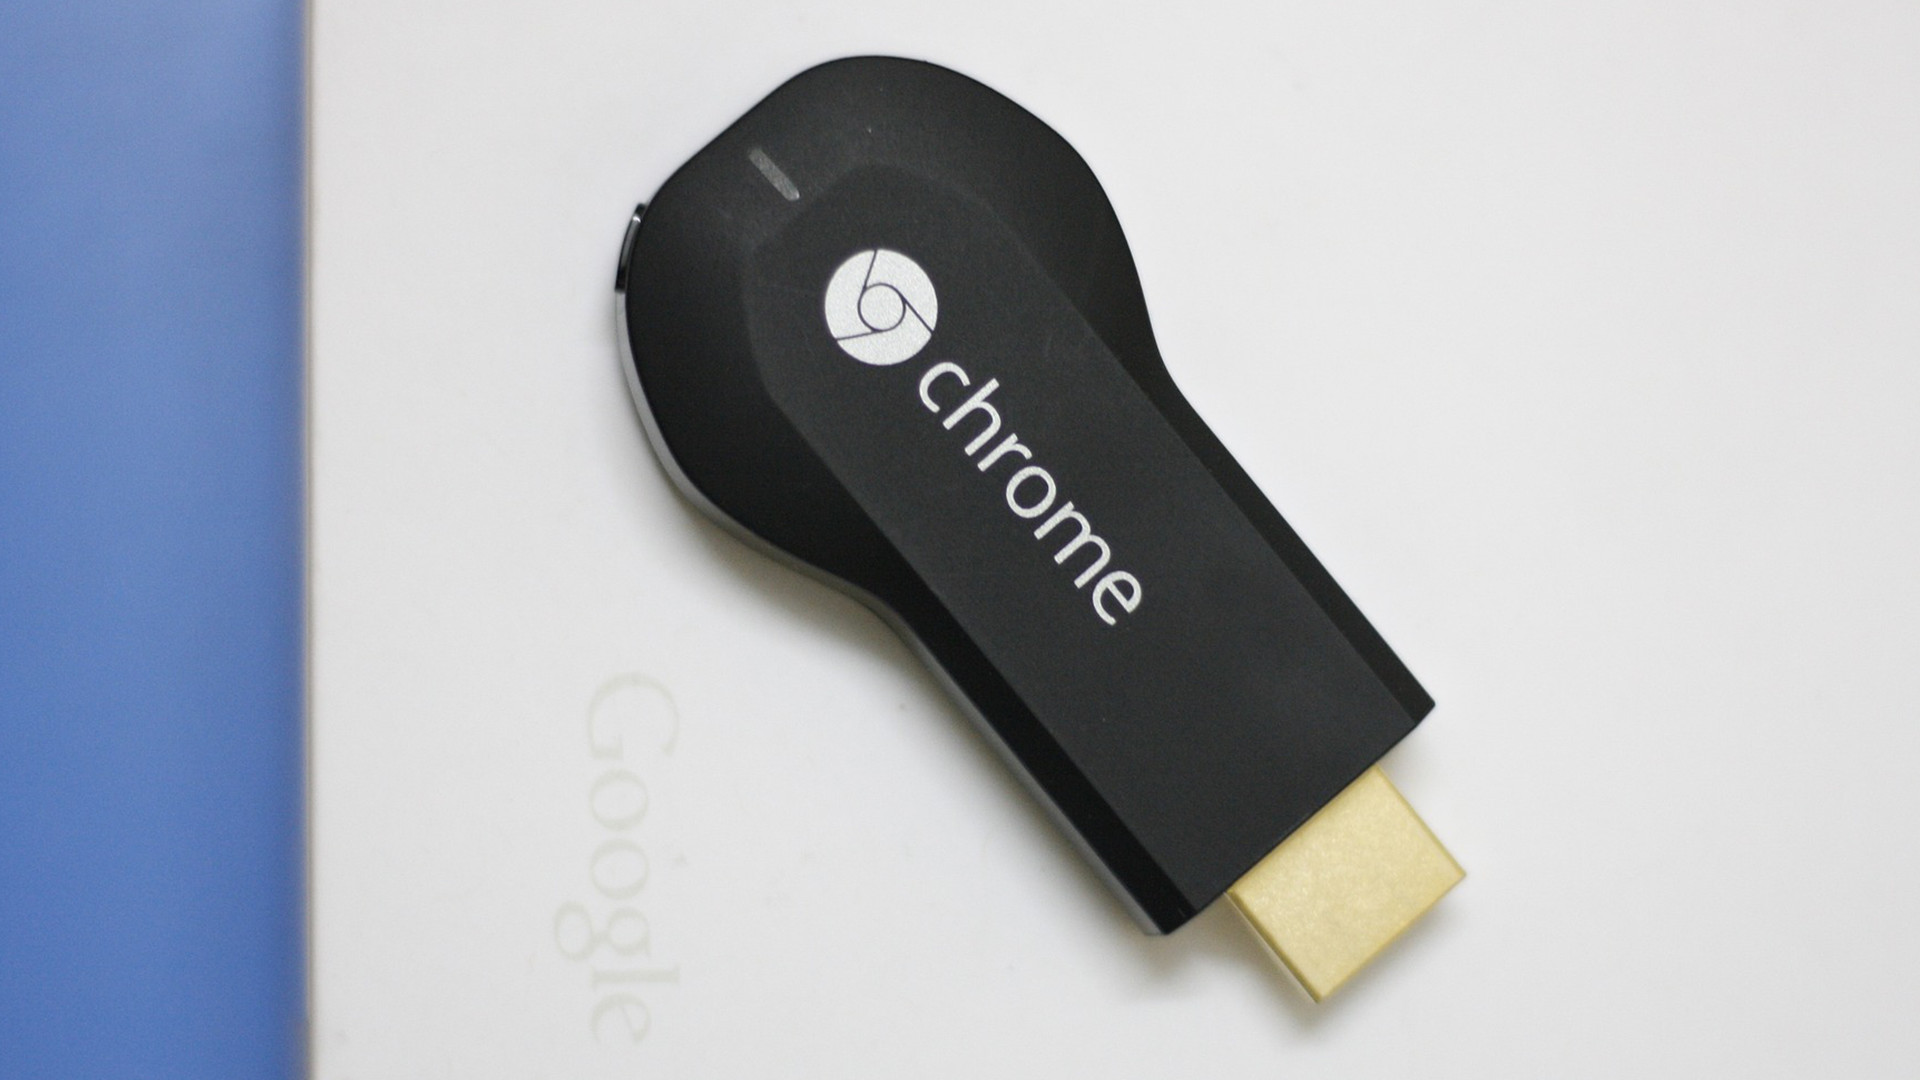 First-gen Chromecast owners will need to upgrade after Google terminates  support